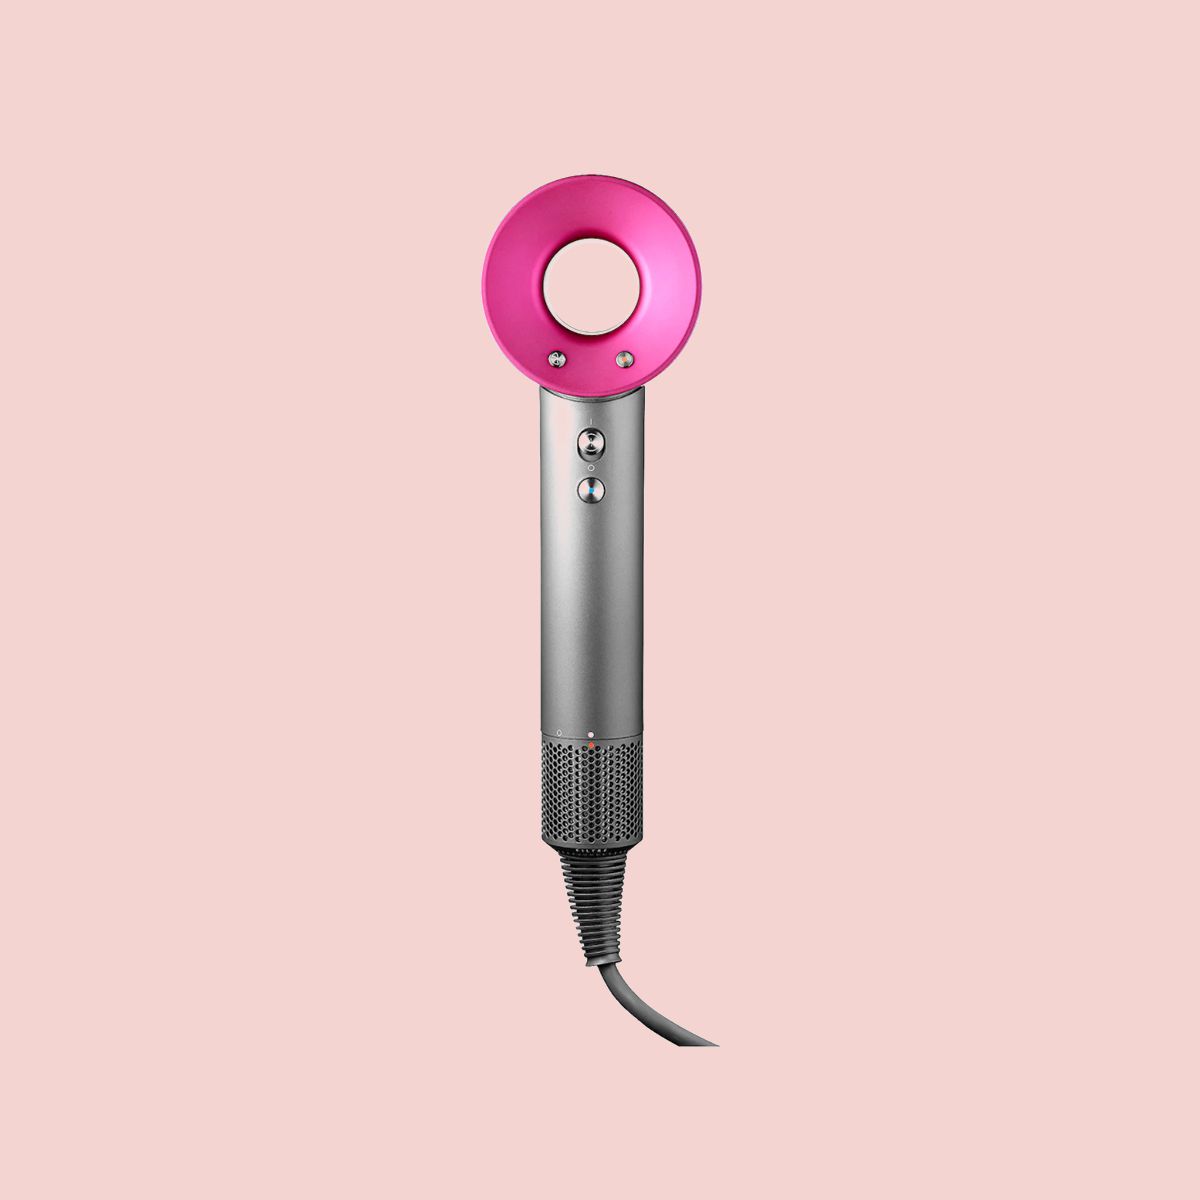 dyson hair dryer in front of pink background